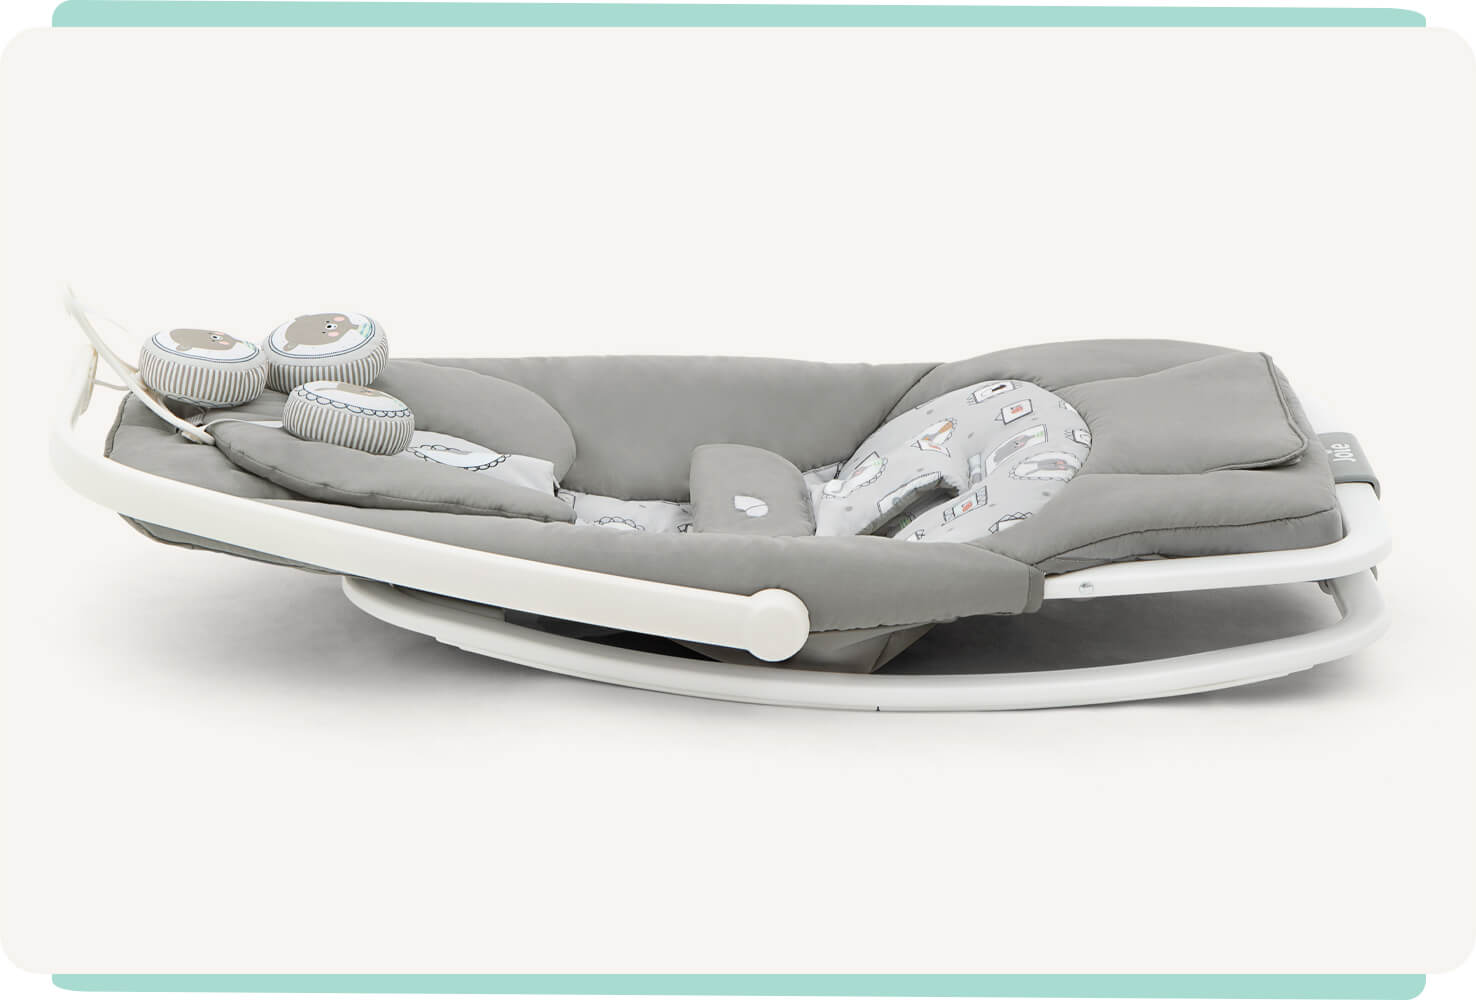  Grey patterned dreamer Joie bouncer lying flat on the ground to display compact feature.